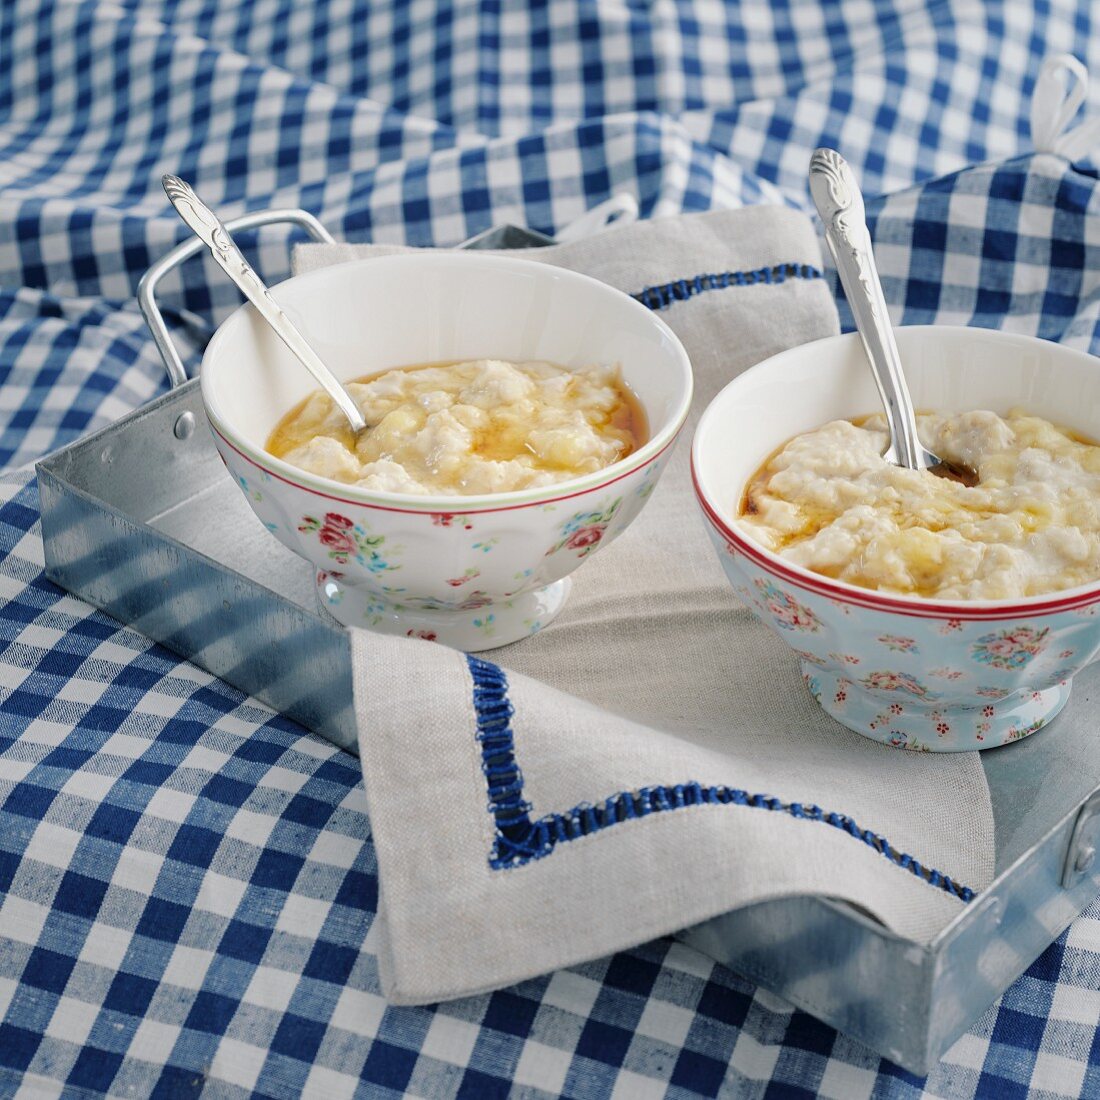 Vegetarian porridge with bananas and maple syrup